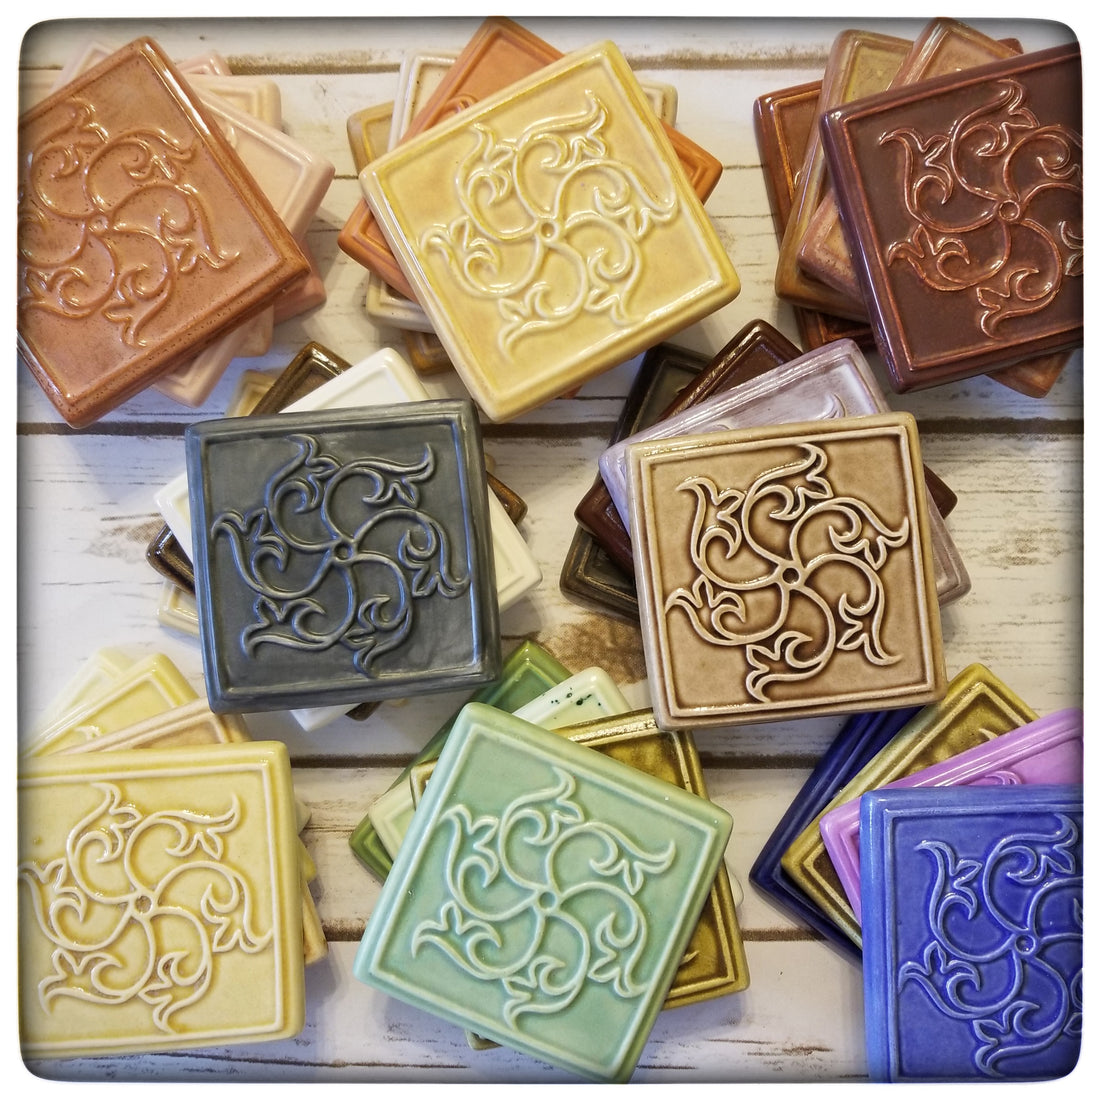 This Week Only: Tile Coaster Sets